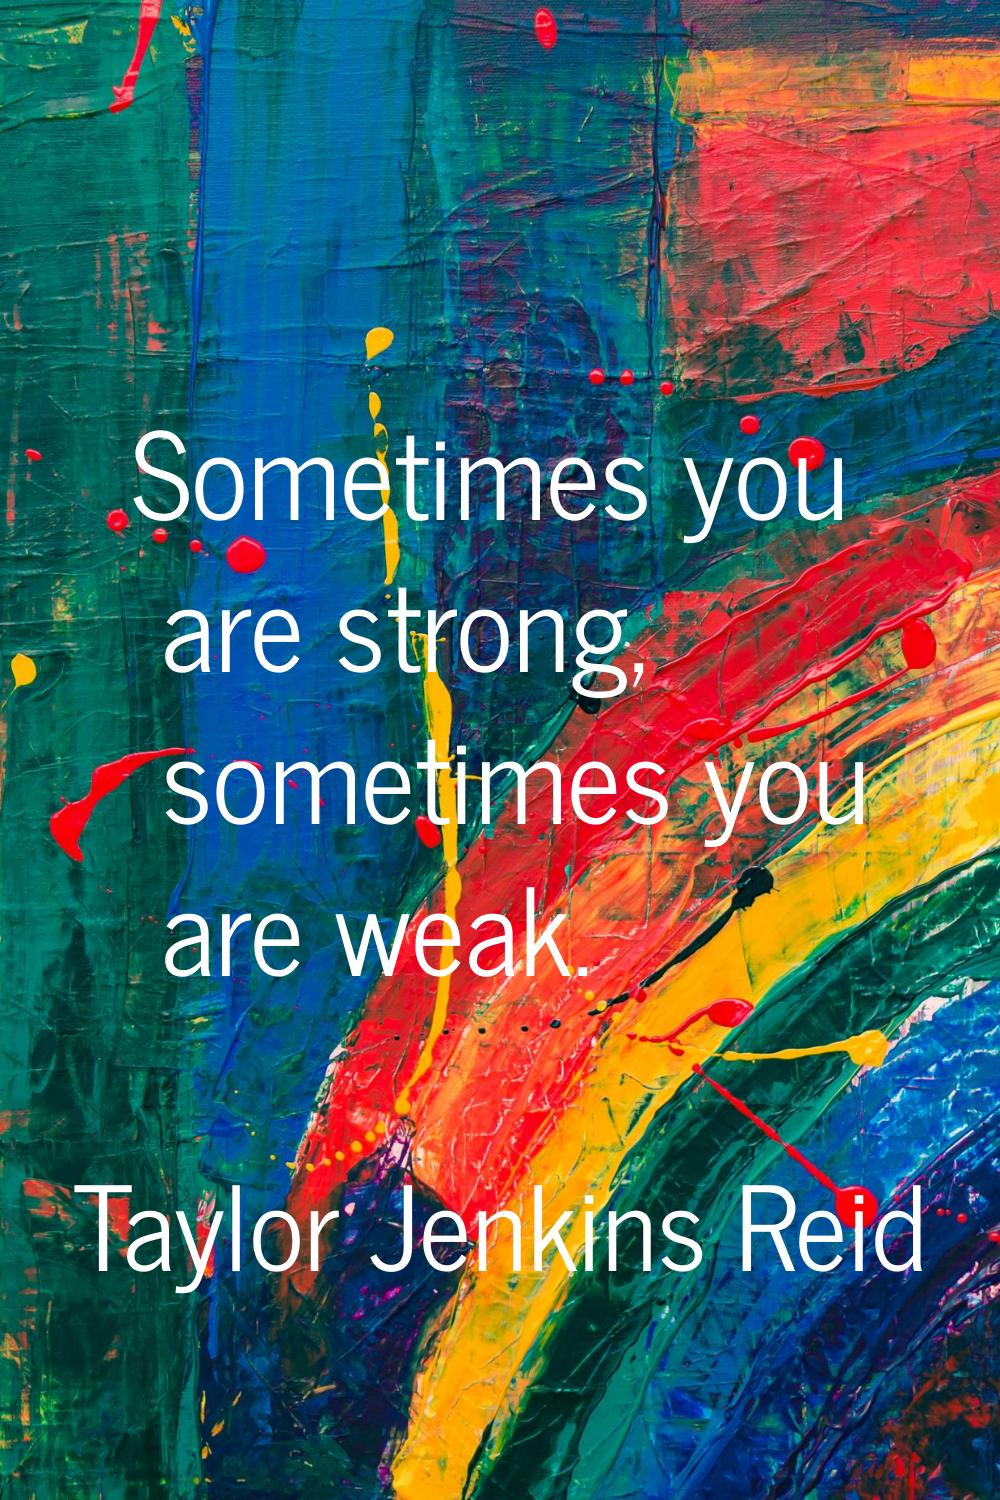 Sometimes you are strong, sometimes you are weak.